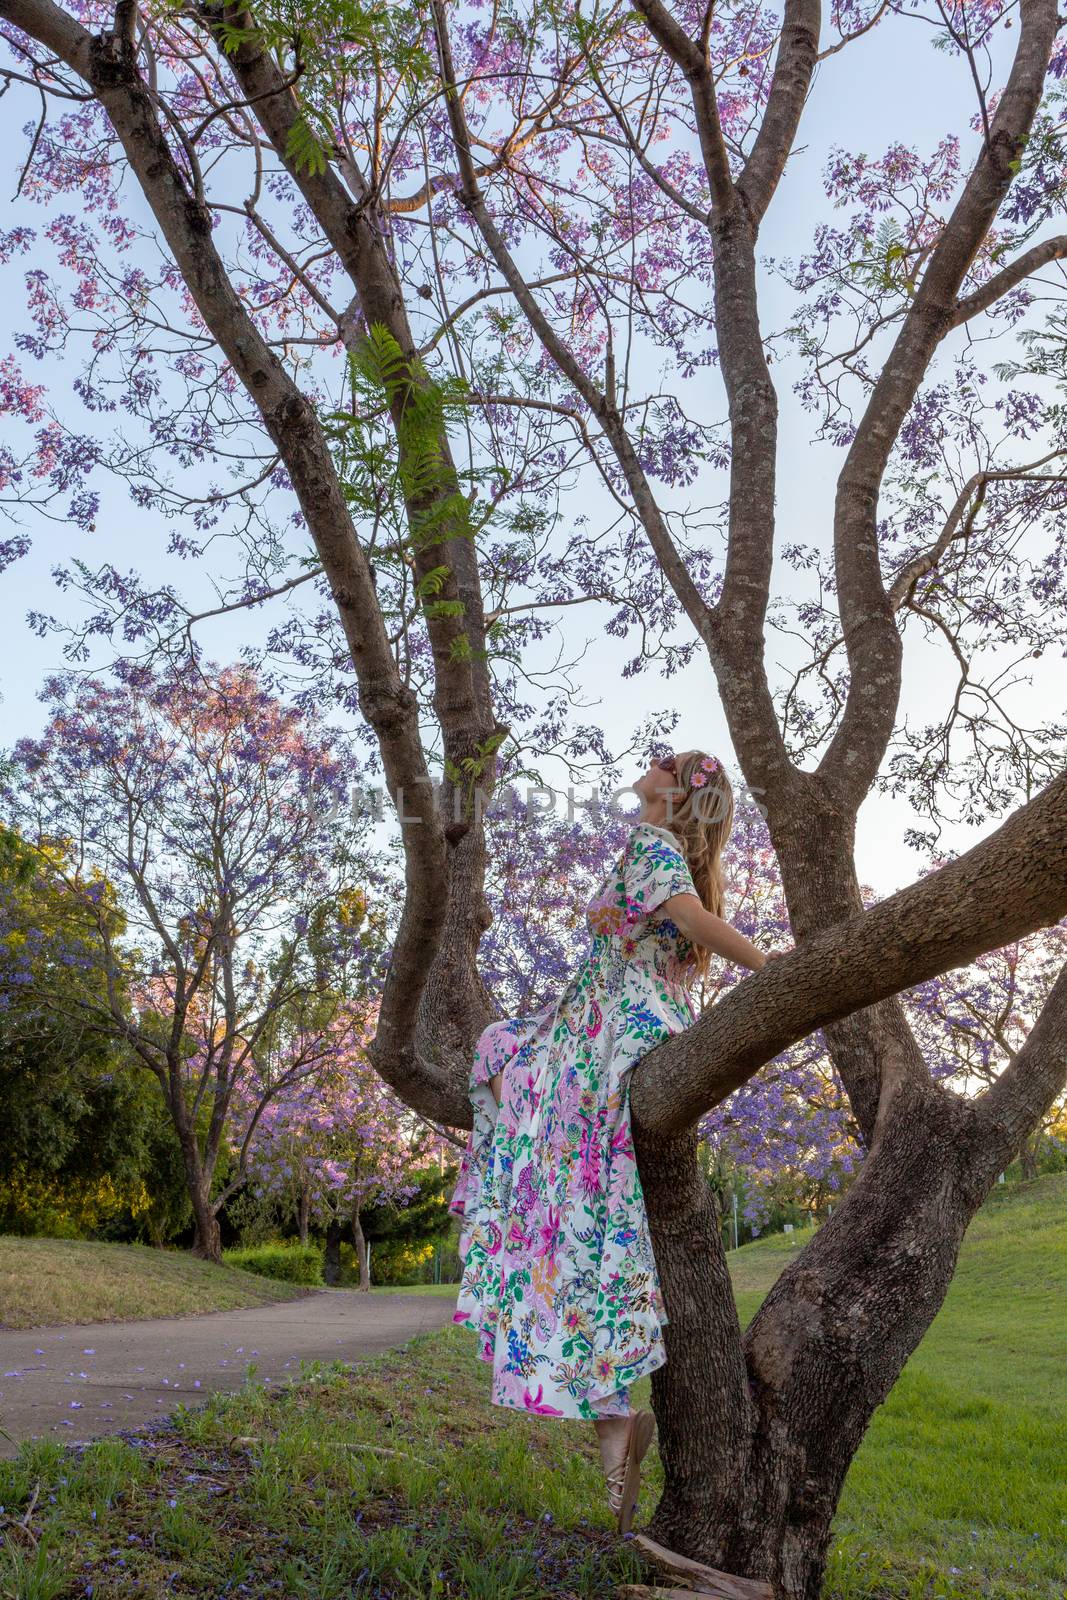 A woman sits in the branch of a Jacaranda tree admiring its beautiful purple flowers